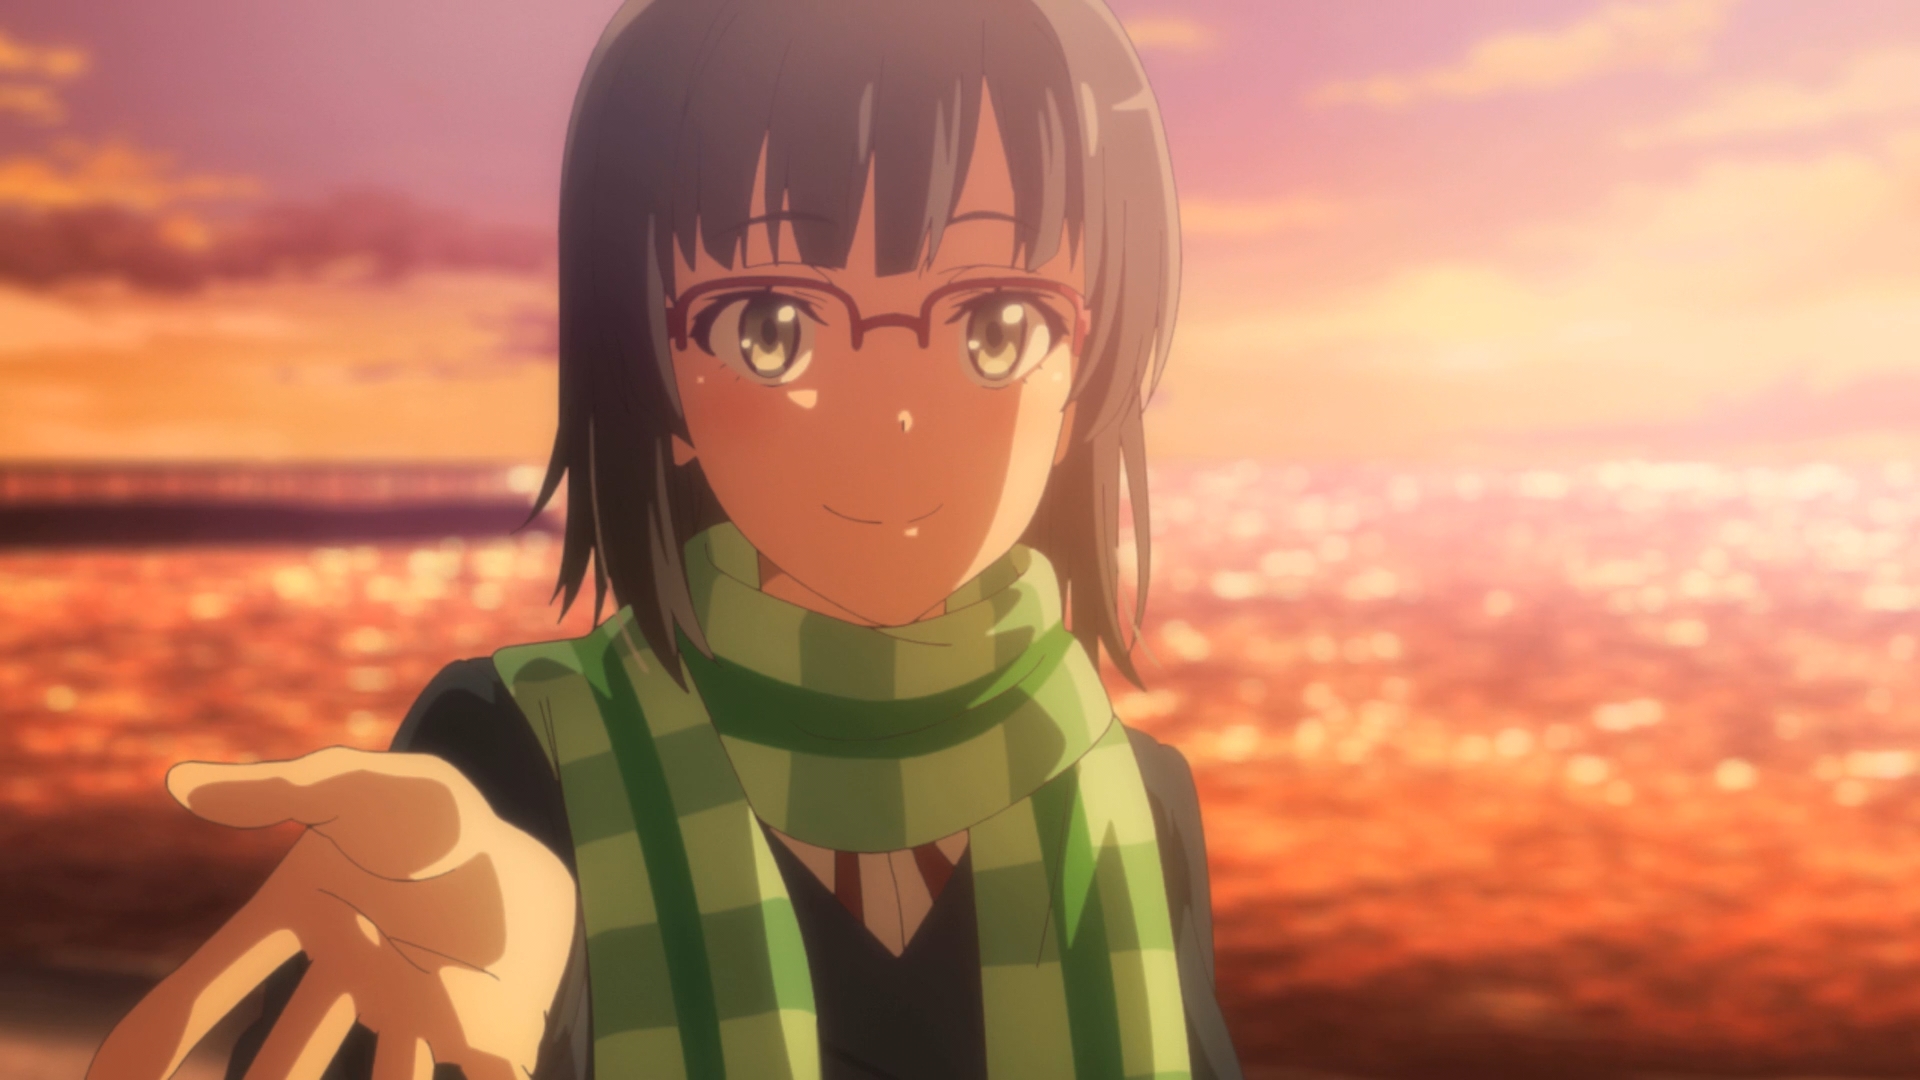 MyAnimeList.net - A new project and an OVA were just announced for Yahari  Ore no Seishun Love Comedy wa Machigatteiru.! 💖 Details: bit.ly/3qvNid3